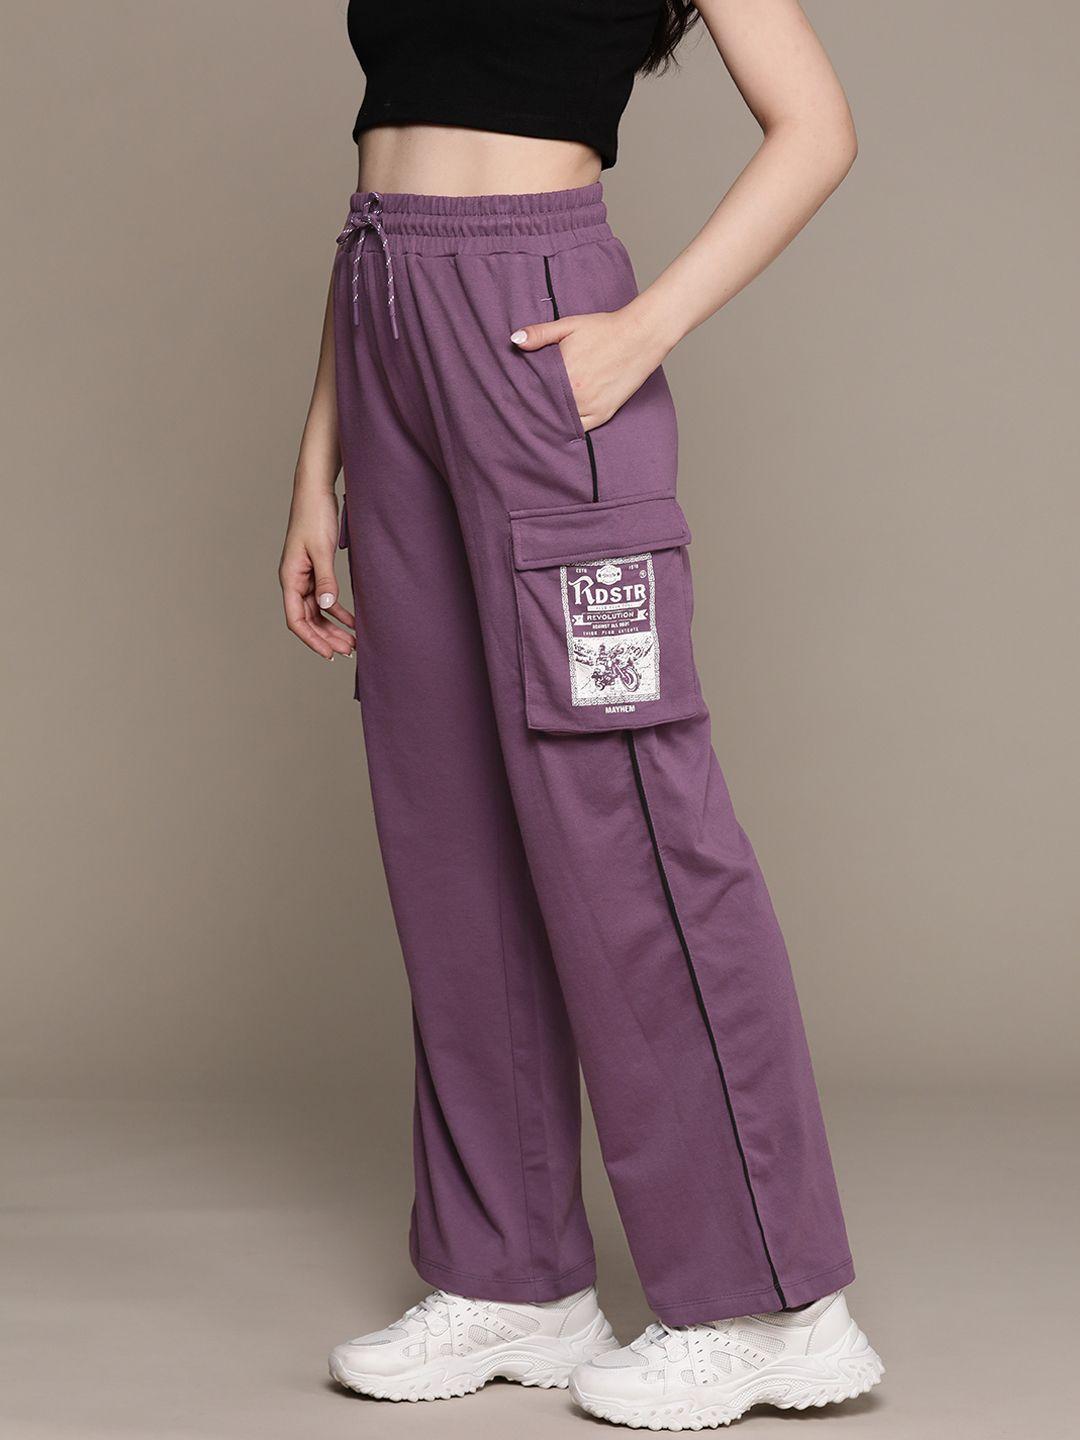 the roadster lifestyle co. re/lax women contrast tipping baggy track pants